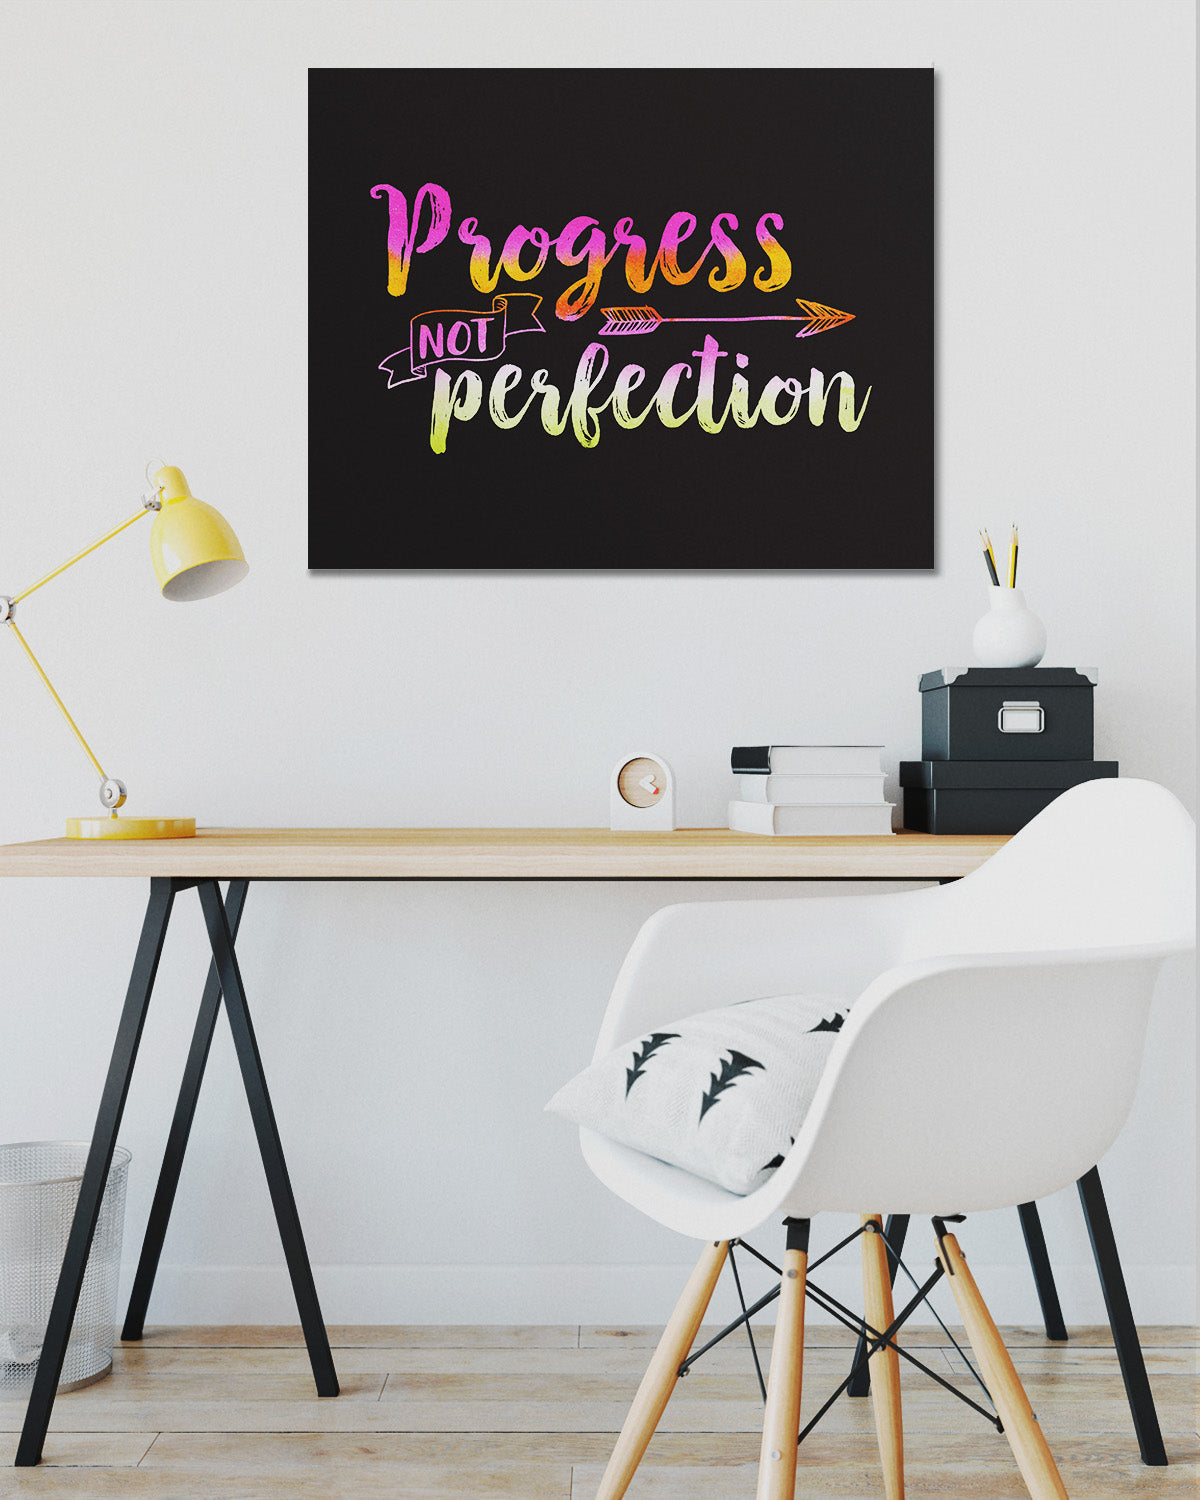 Progress Not Perfection - Motivational Wall Art - Recovery Gifts - Sobriety Room Decor - Drug and Alcohol Recovery - Encouragement Wall Art - Addiction Office Decor